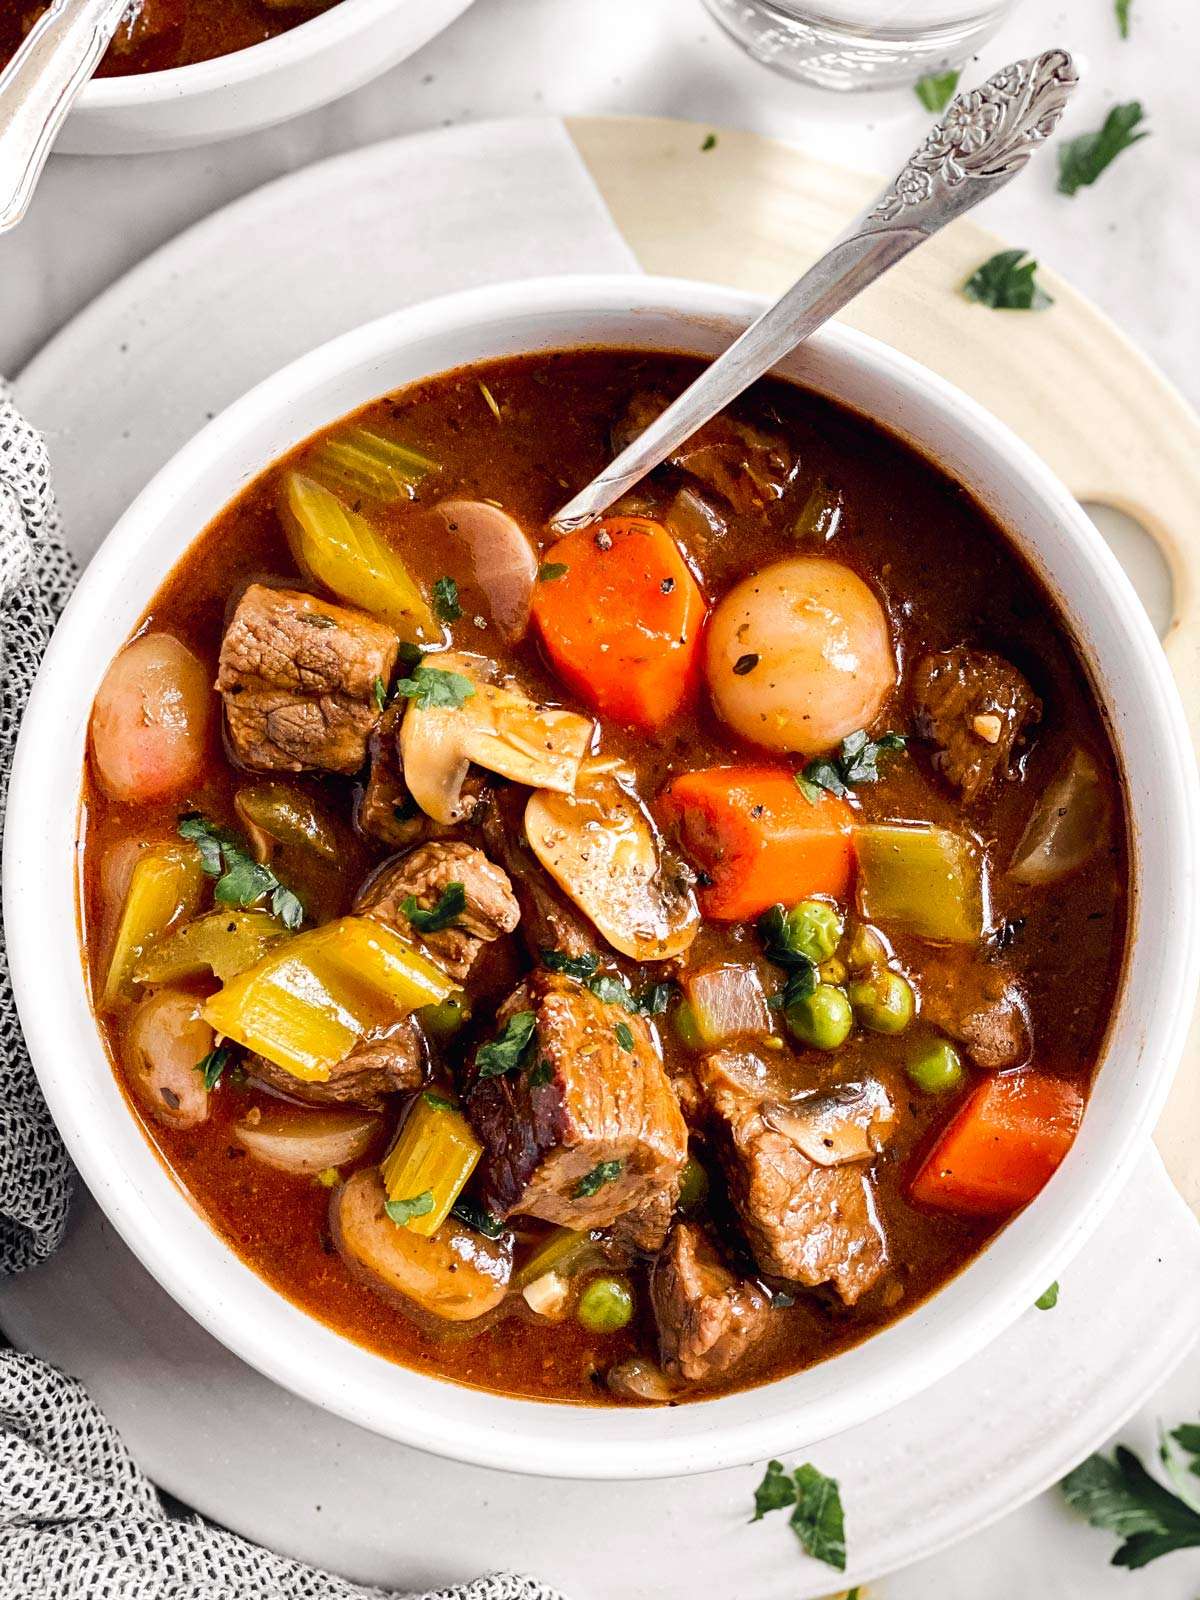 Keto Beef Stew (Slow Cooker or Oven) Recipe